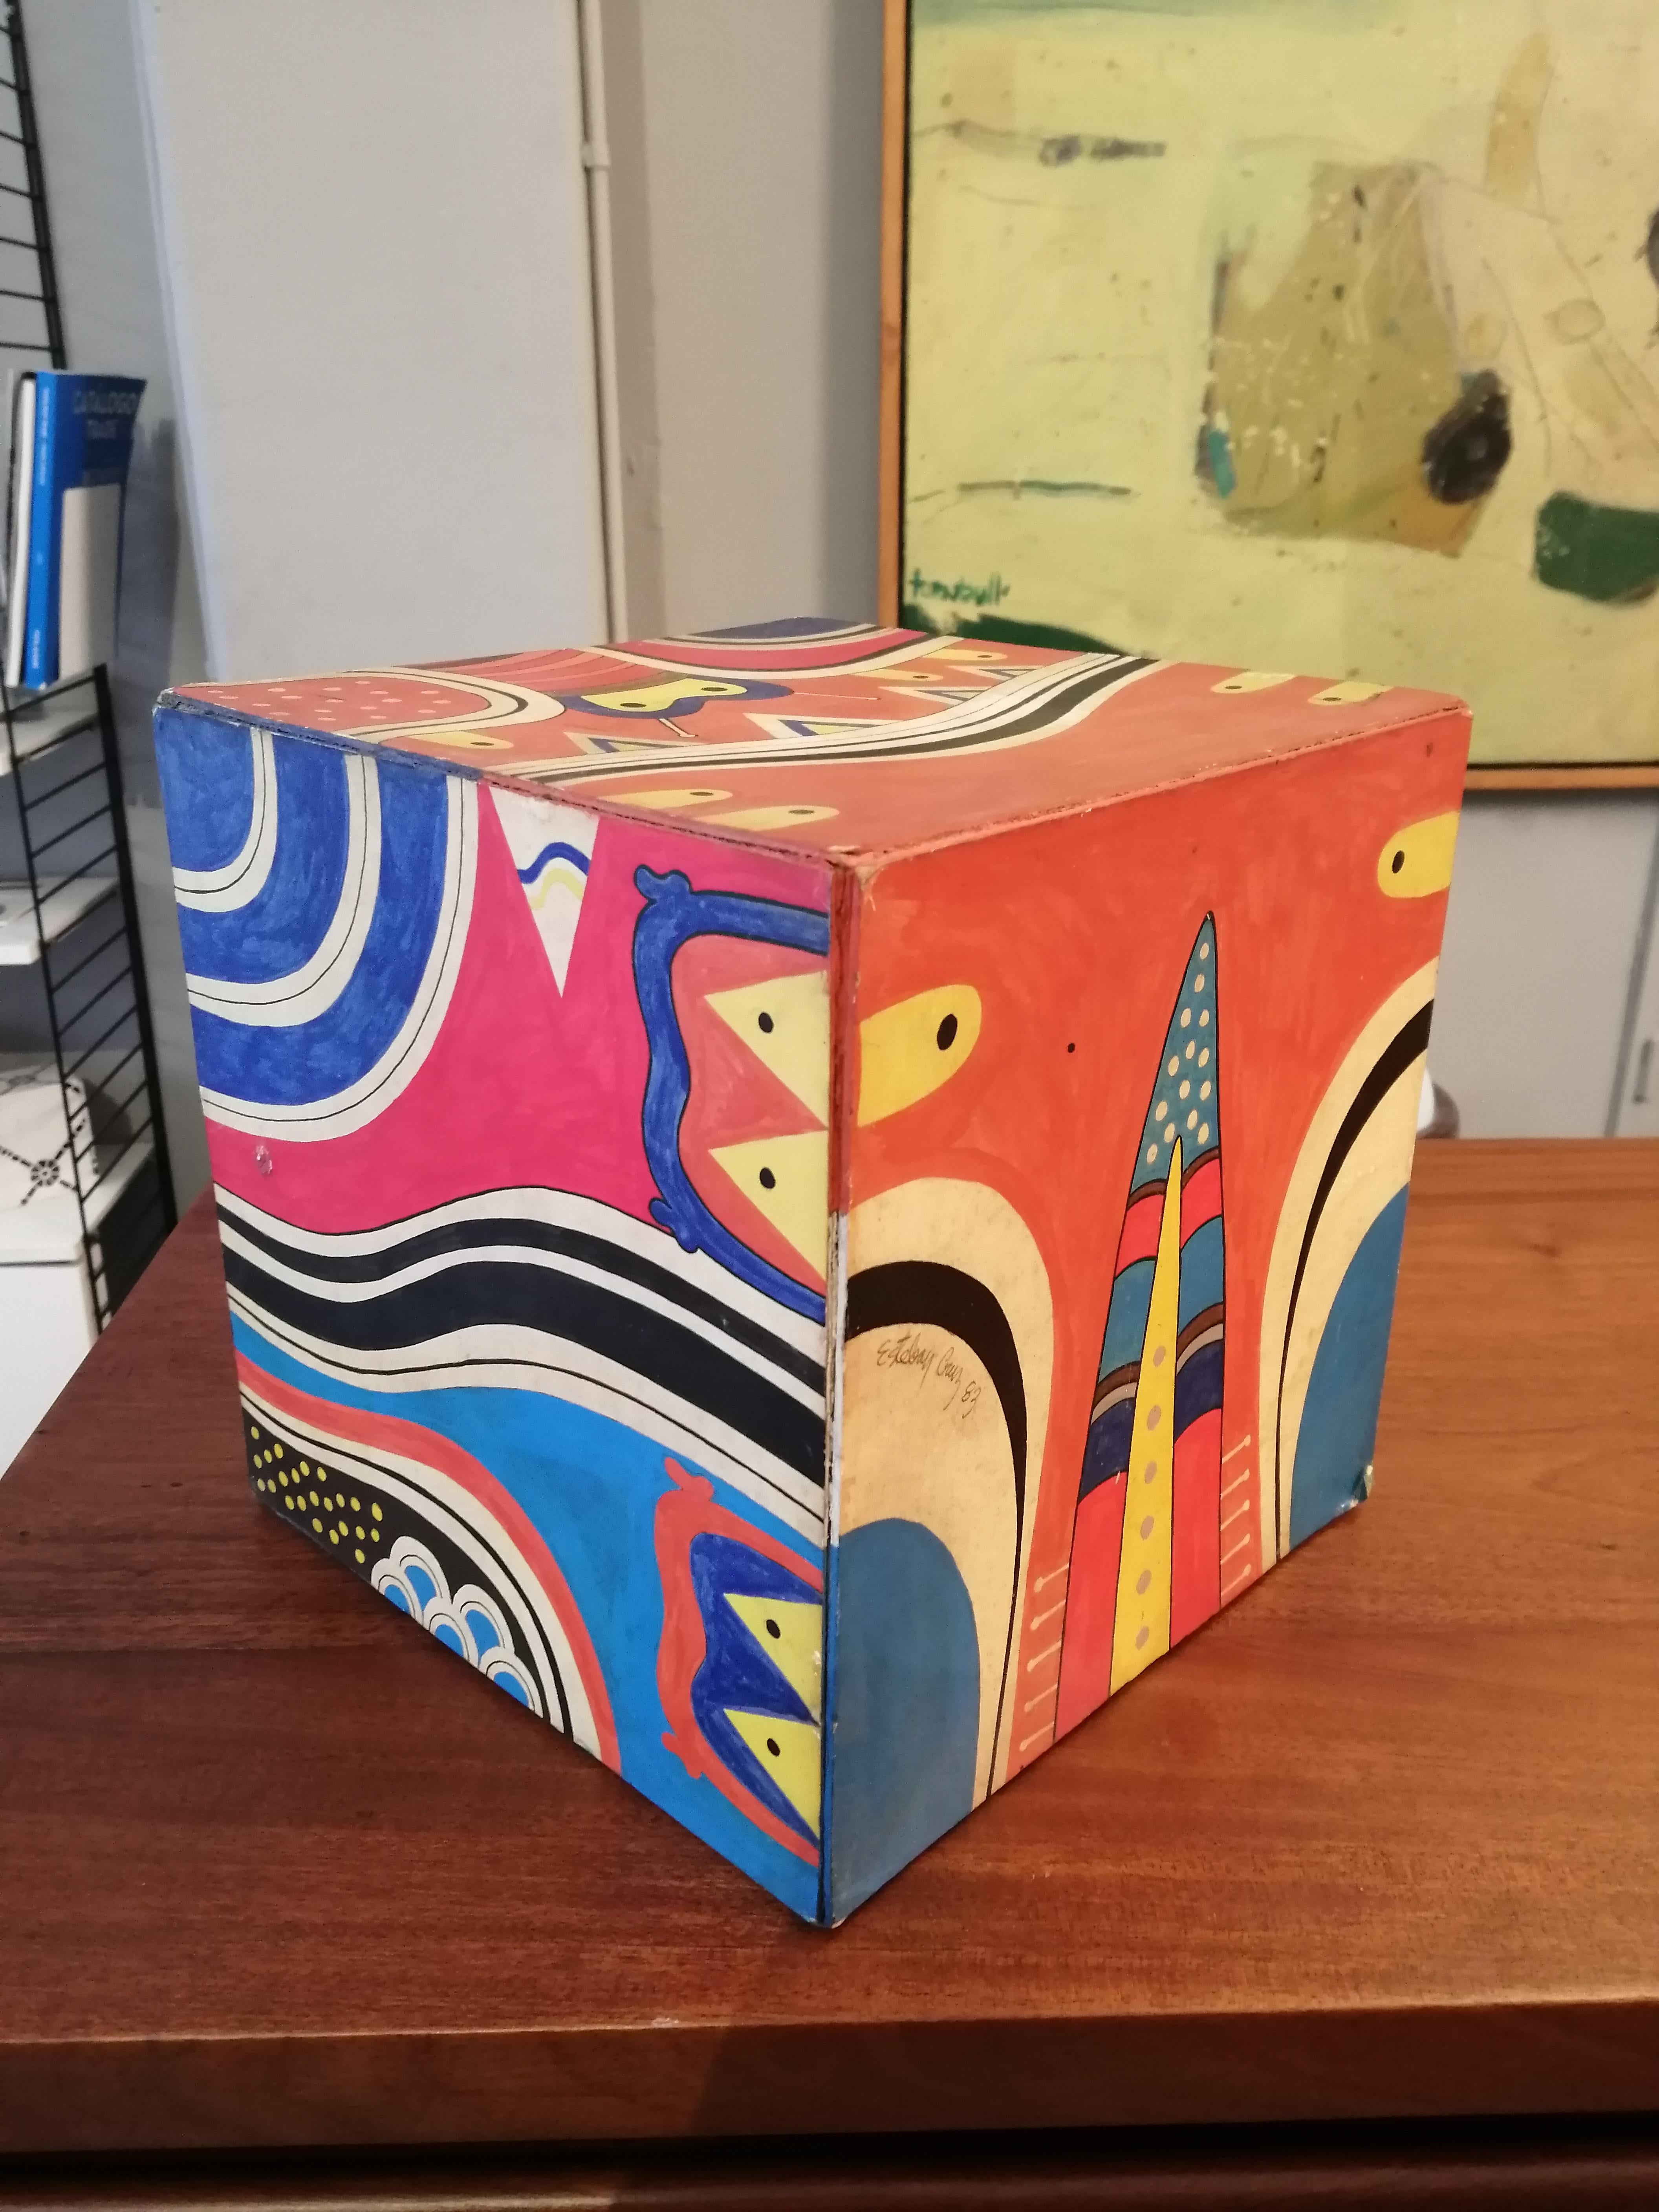 Acrylic on cardboard cube painting by Mexican artist Esteban Cruz. The painting features different shapes of Maori and geometric inspiration. Signed and dated 83. 

Born in Orizaba, Veracruz in 1935, Esteban Cruz at the Academy of San Carlos in